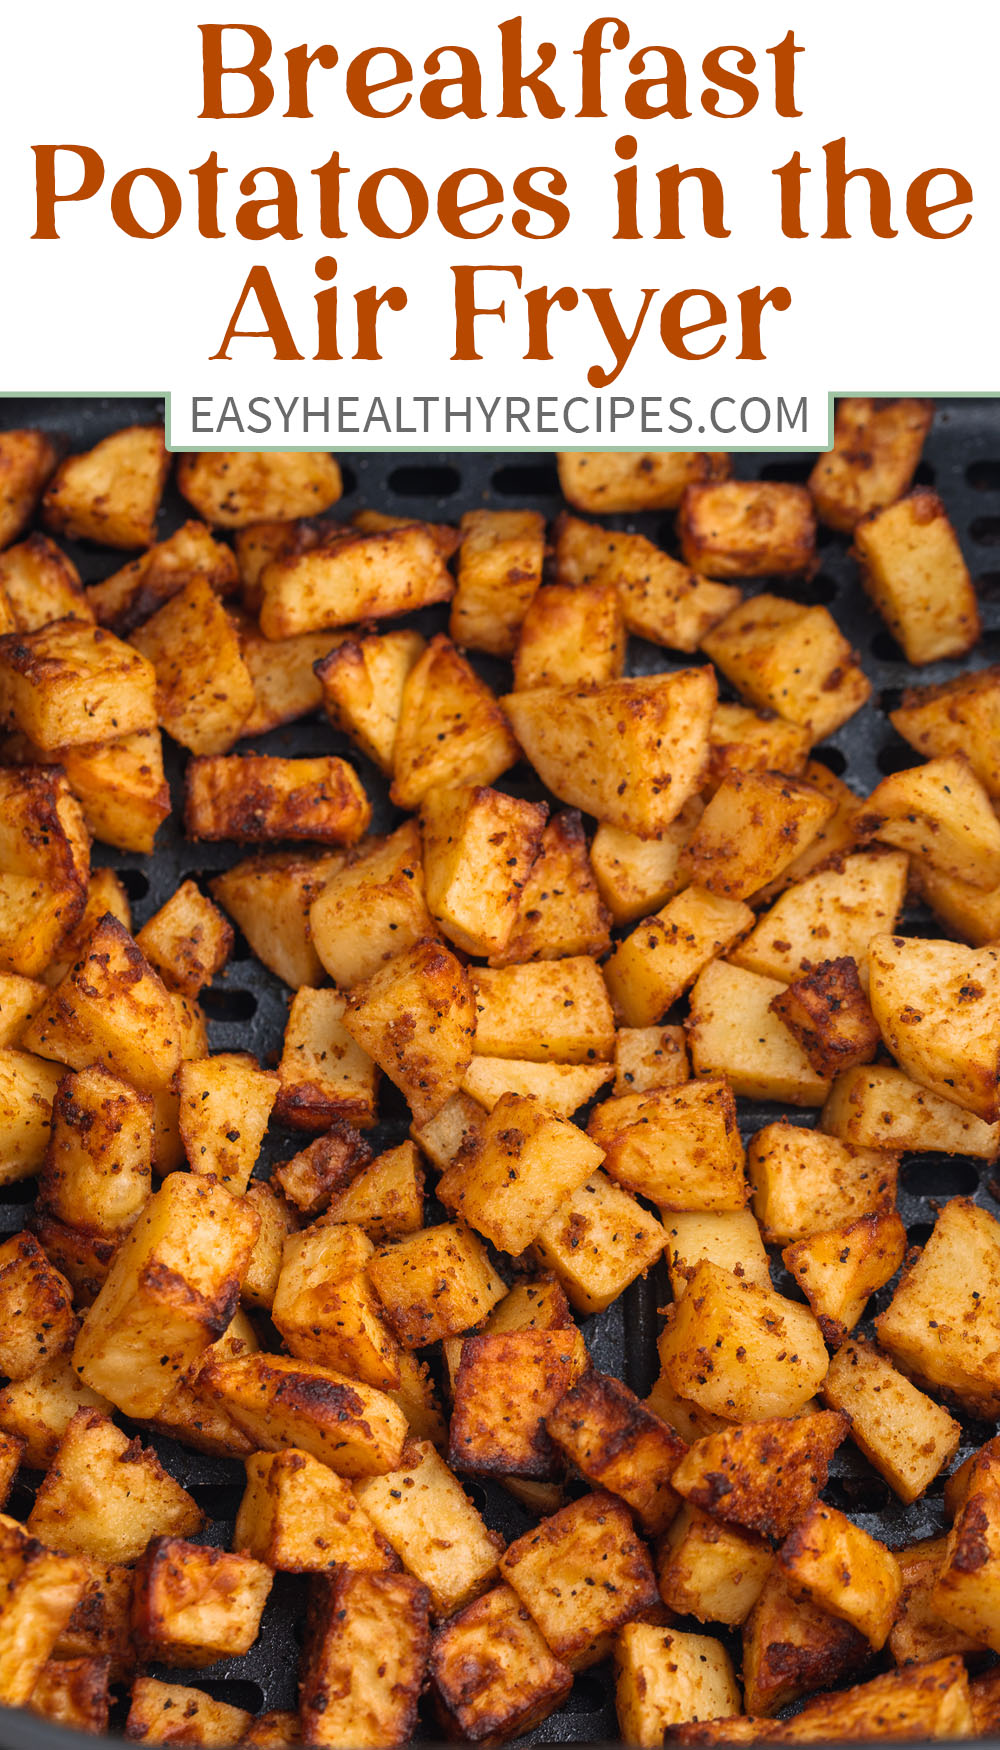 Pin graphic for air fryer breakfast potatoes.